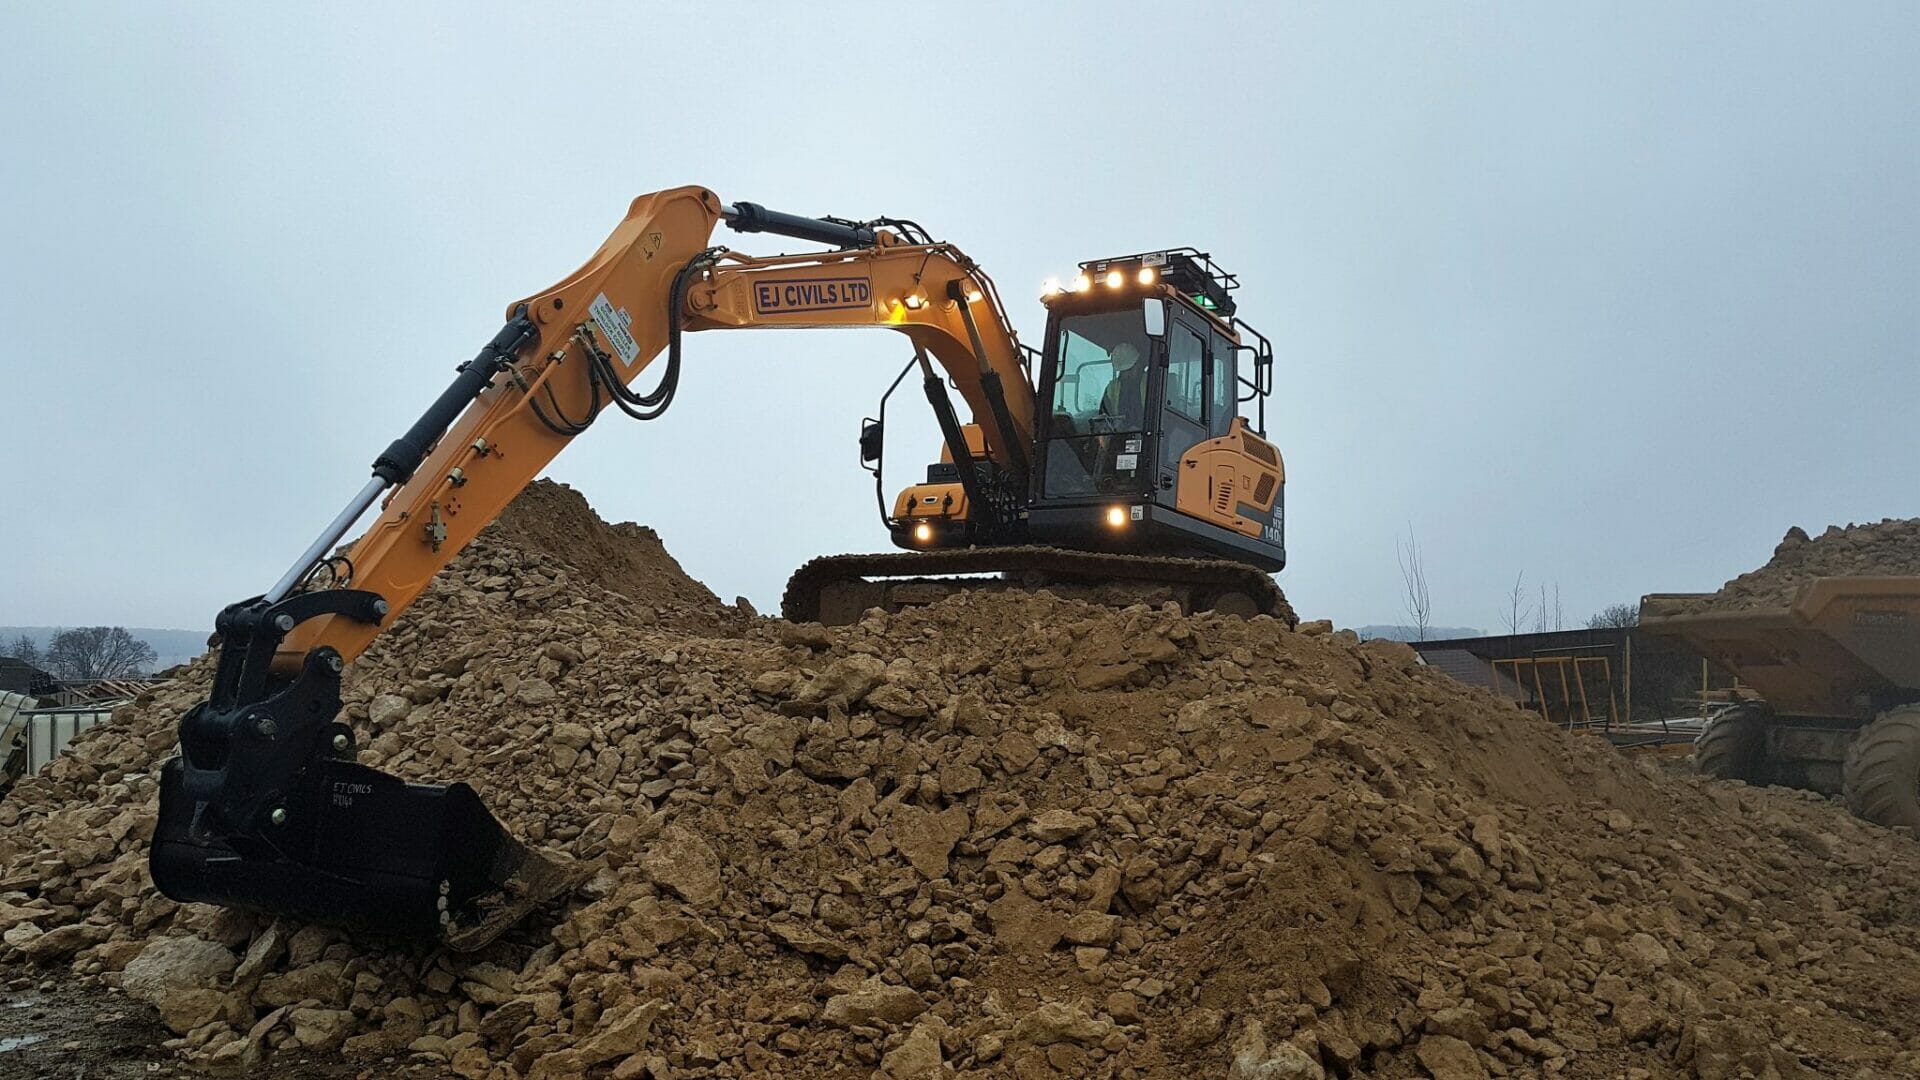 Rave reviews for Willowbrook Plant and Hyundai from EJ Civils Managing Director, Kevin Walsh